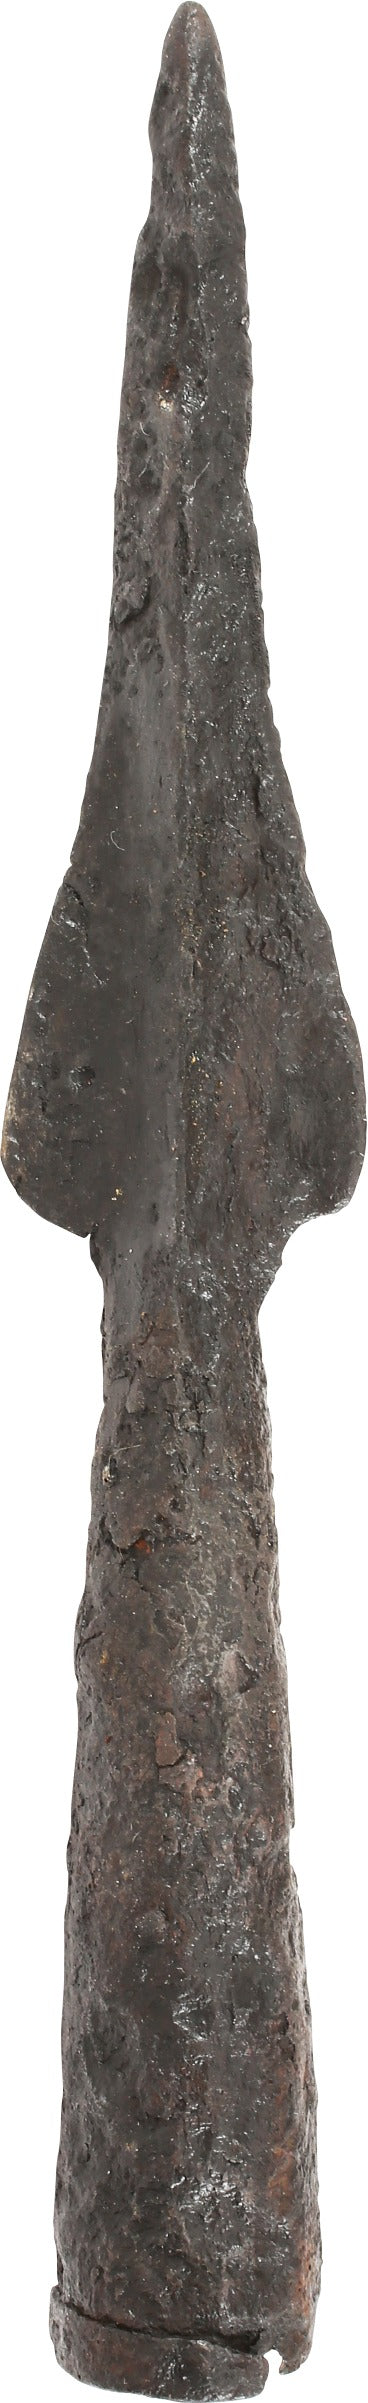 ANGLO SAXON SPEAR POINT, 6TH CENTURY AD - Fagan Arms